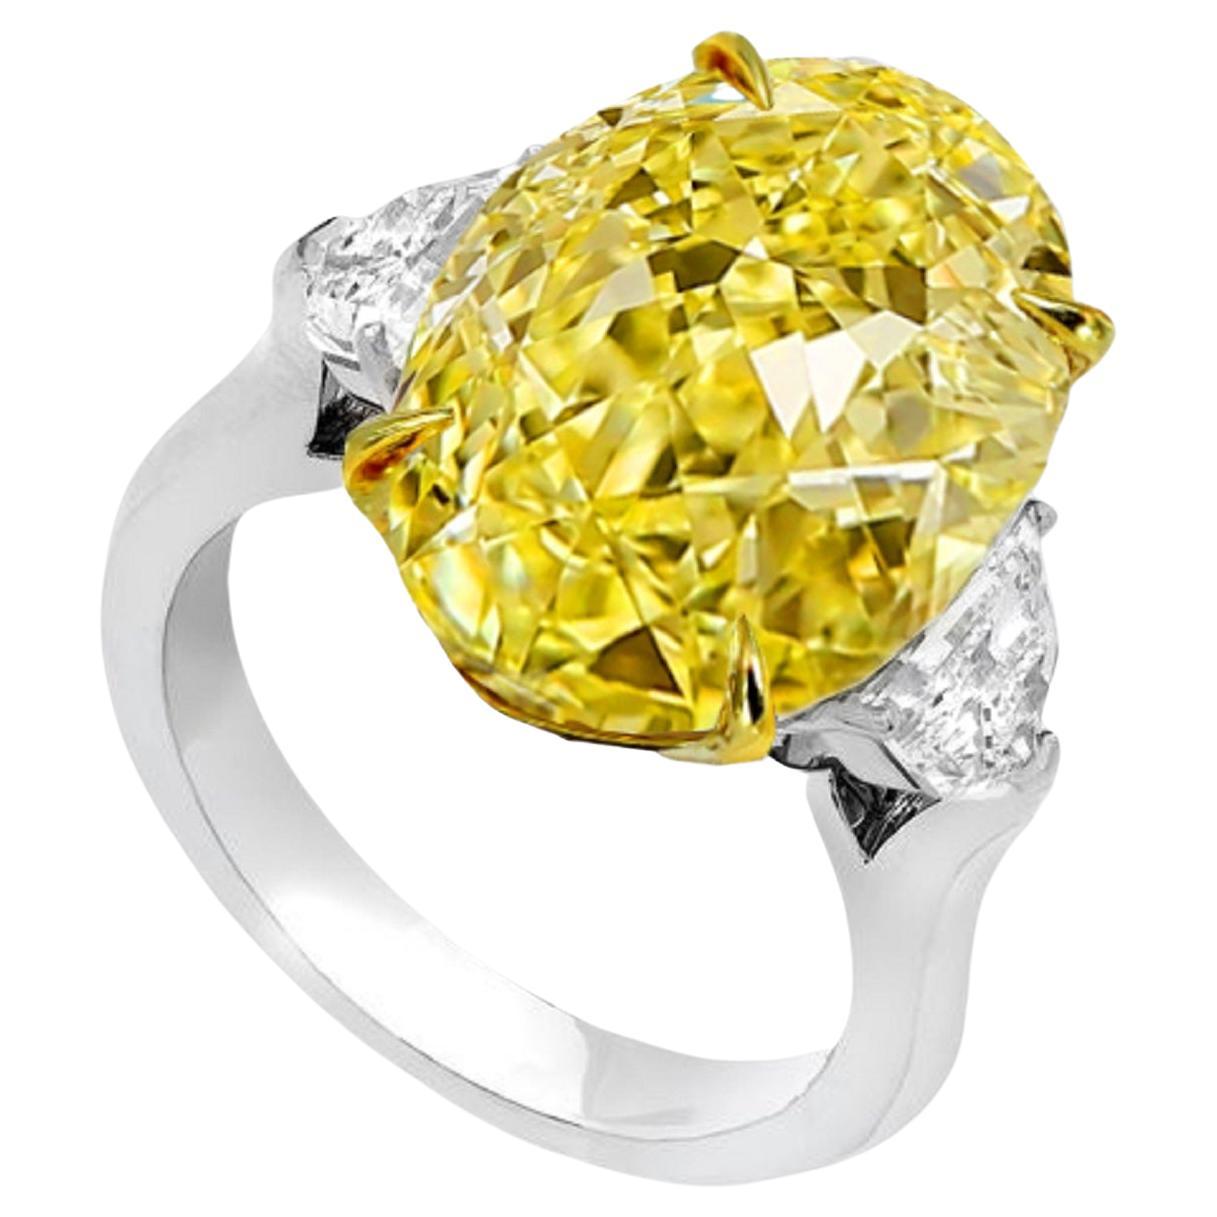 An exquisite 5.18 carat fancy yellow diamond ring
Flawless clarity
